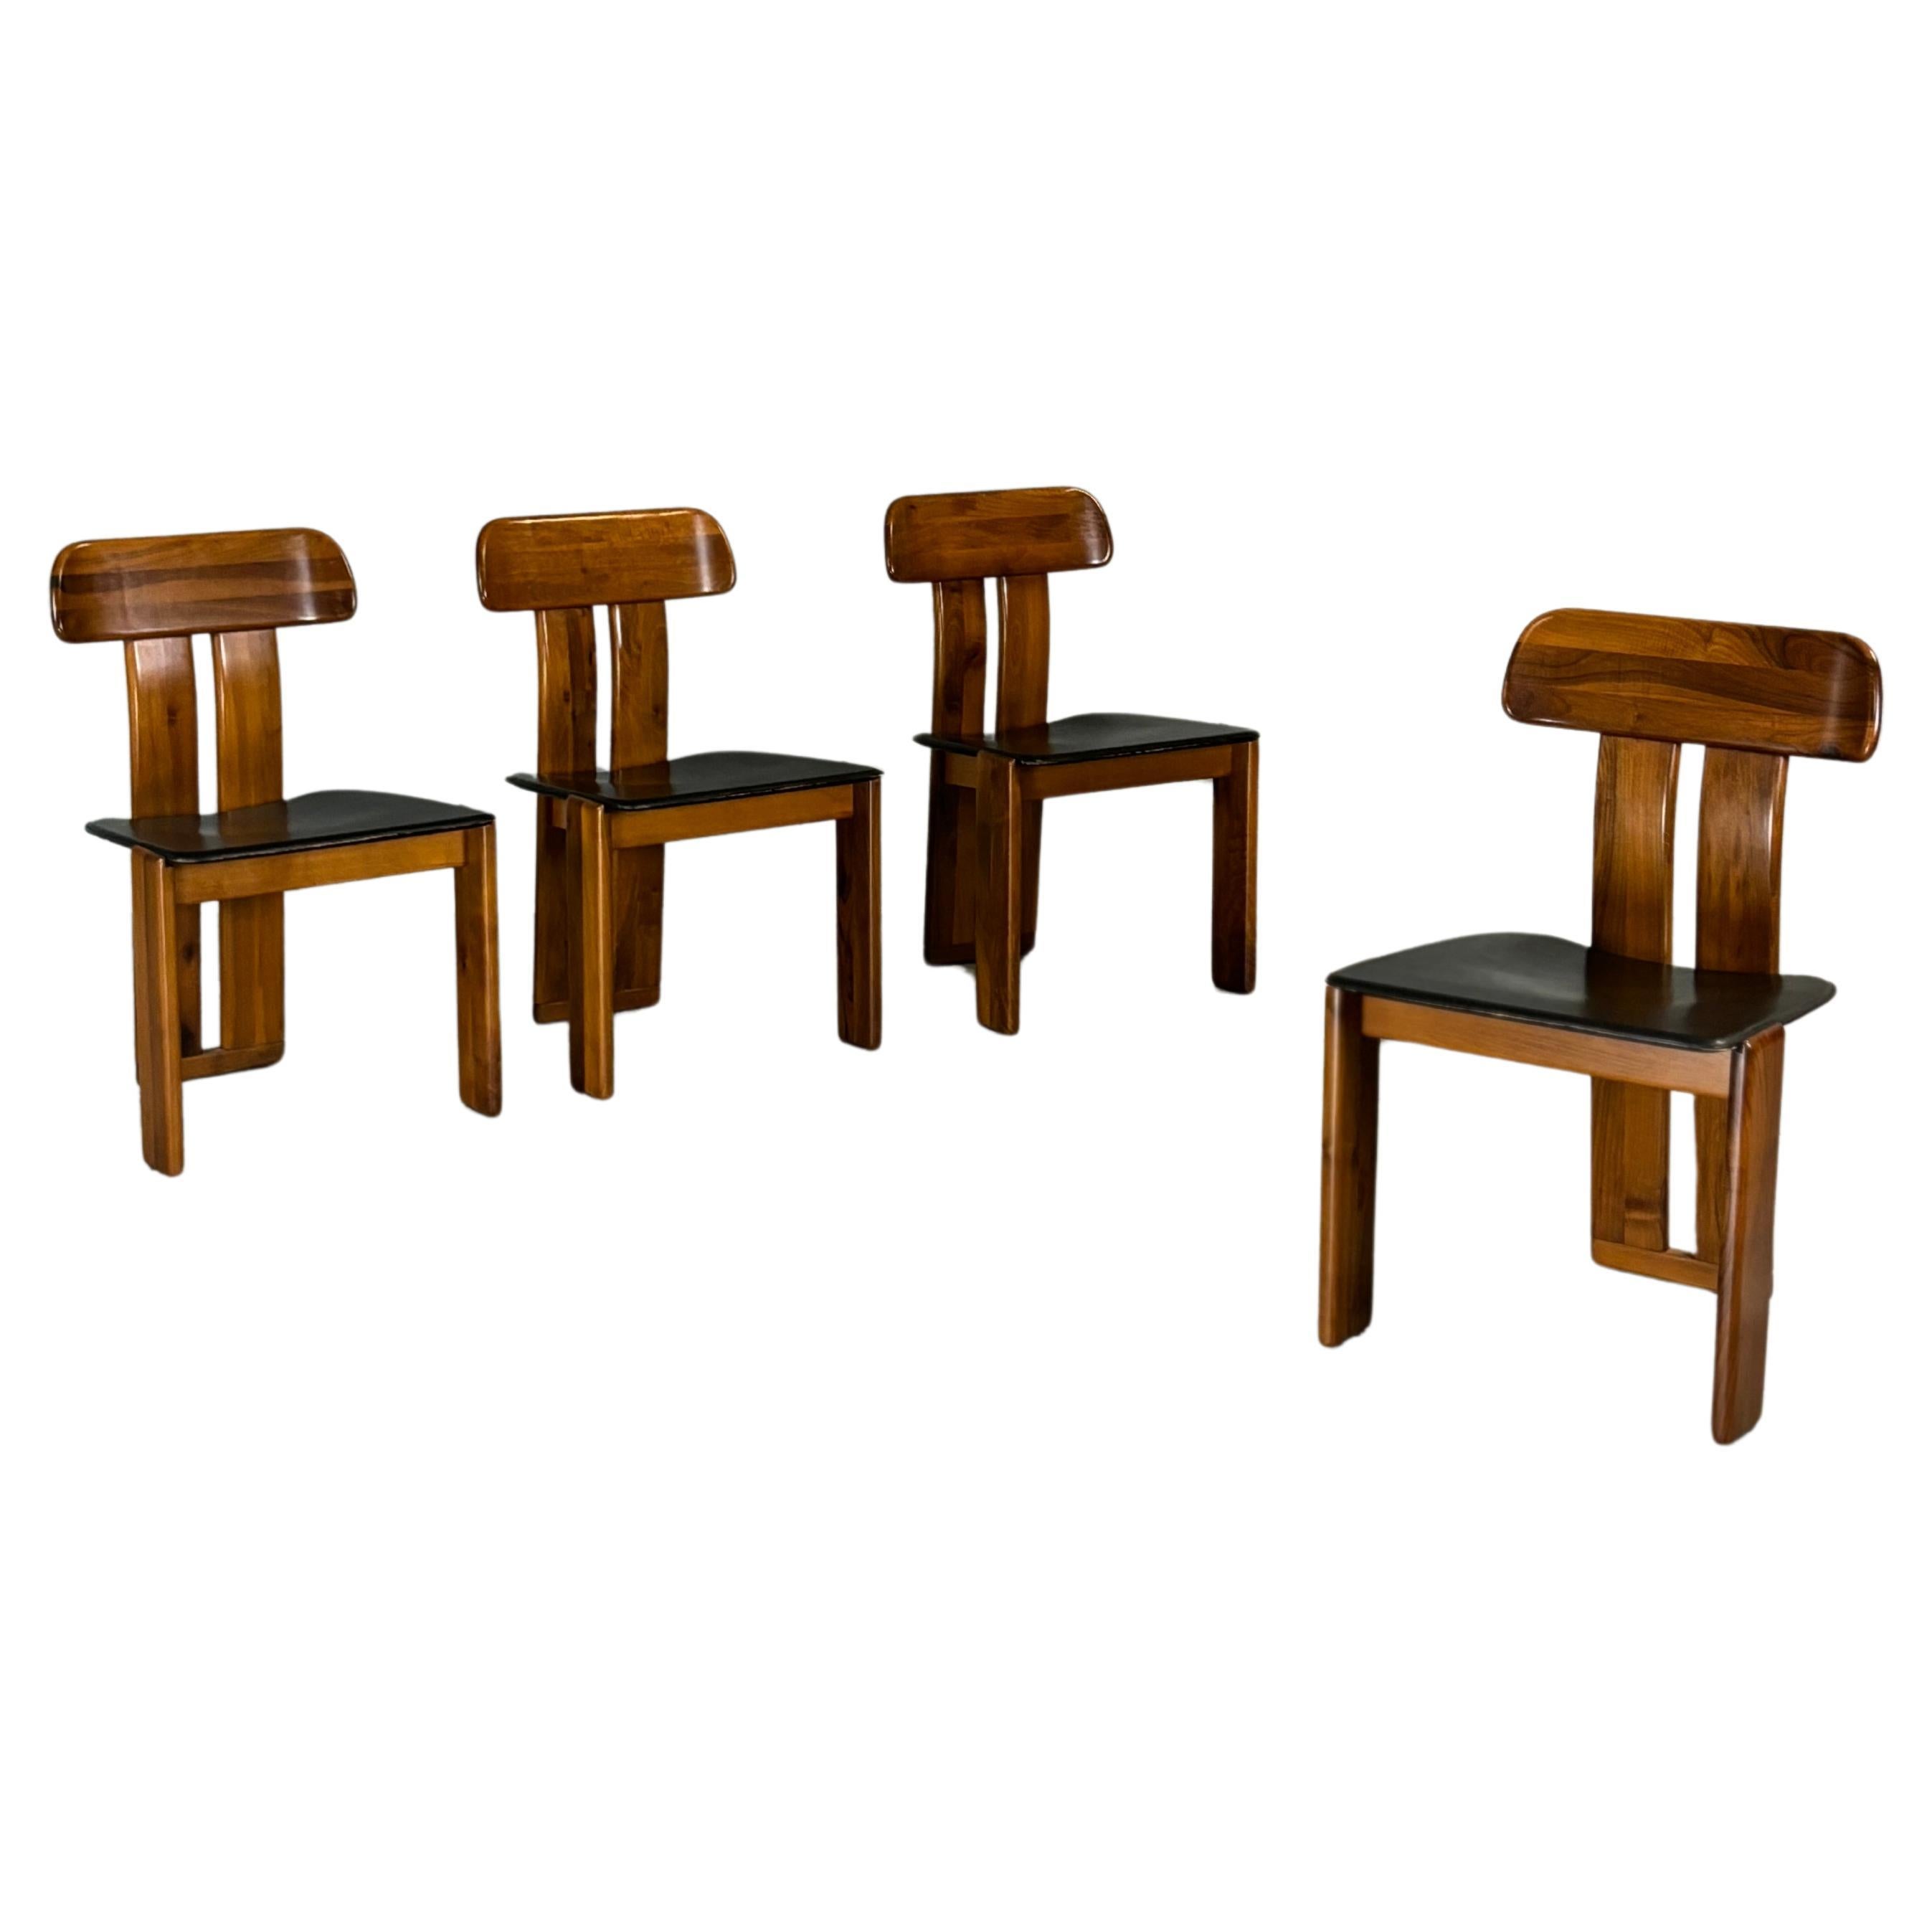 Chairs Sapporo by Mario Marenco for Mobilgirgi, 1970s, set of 4